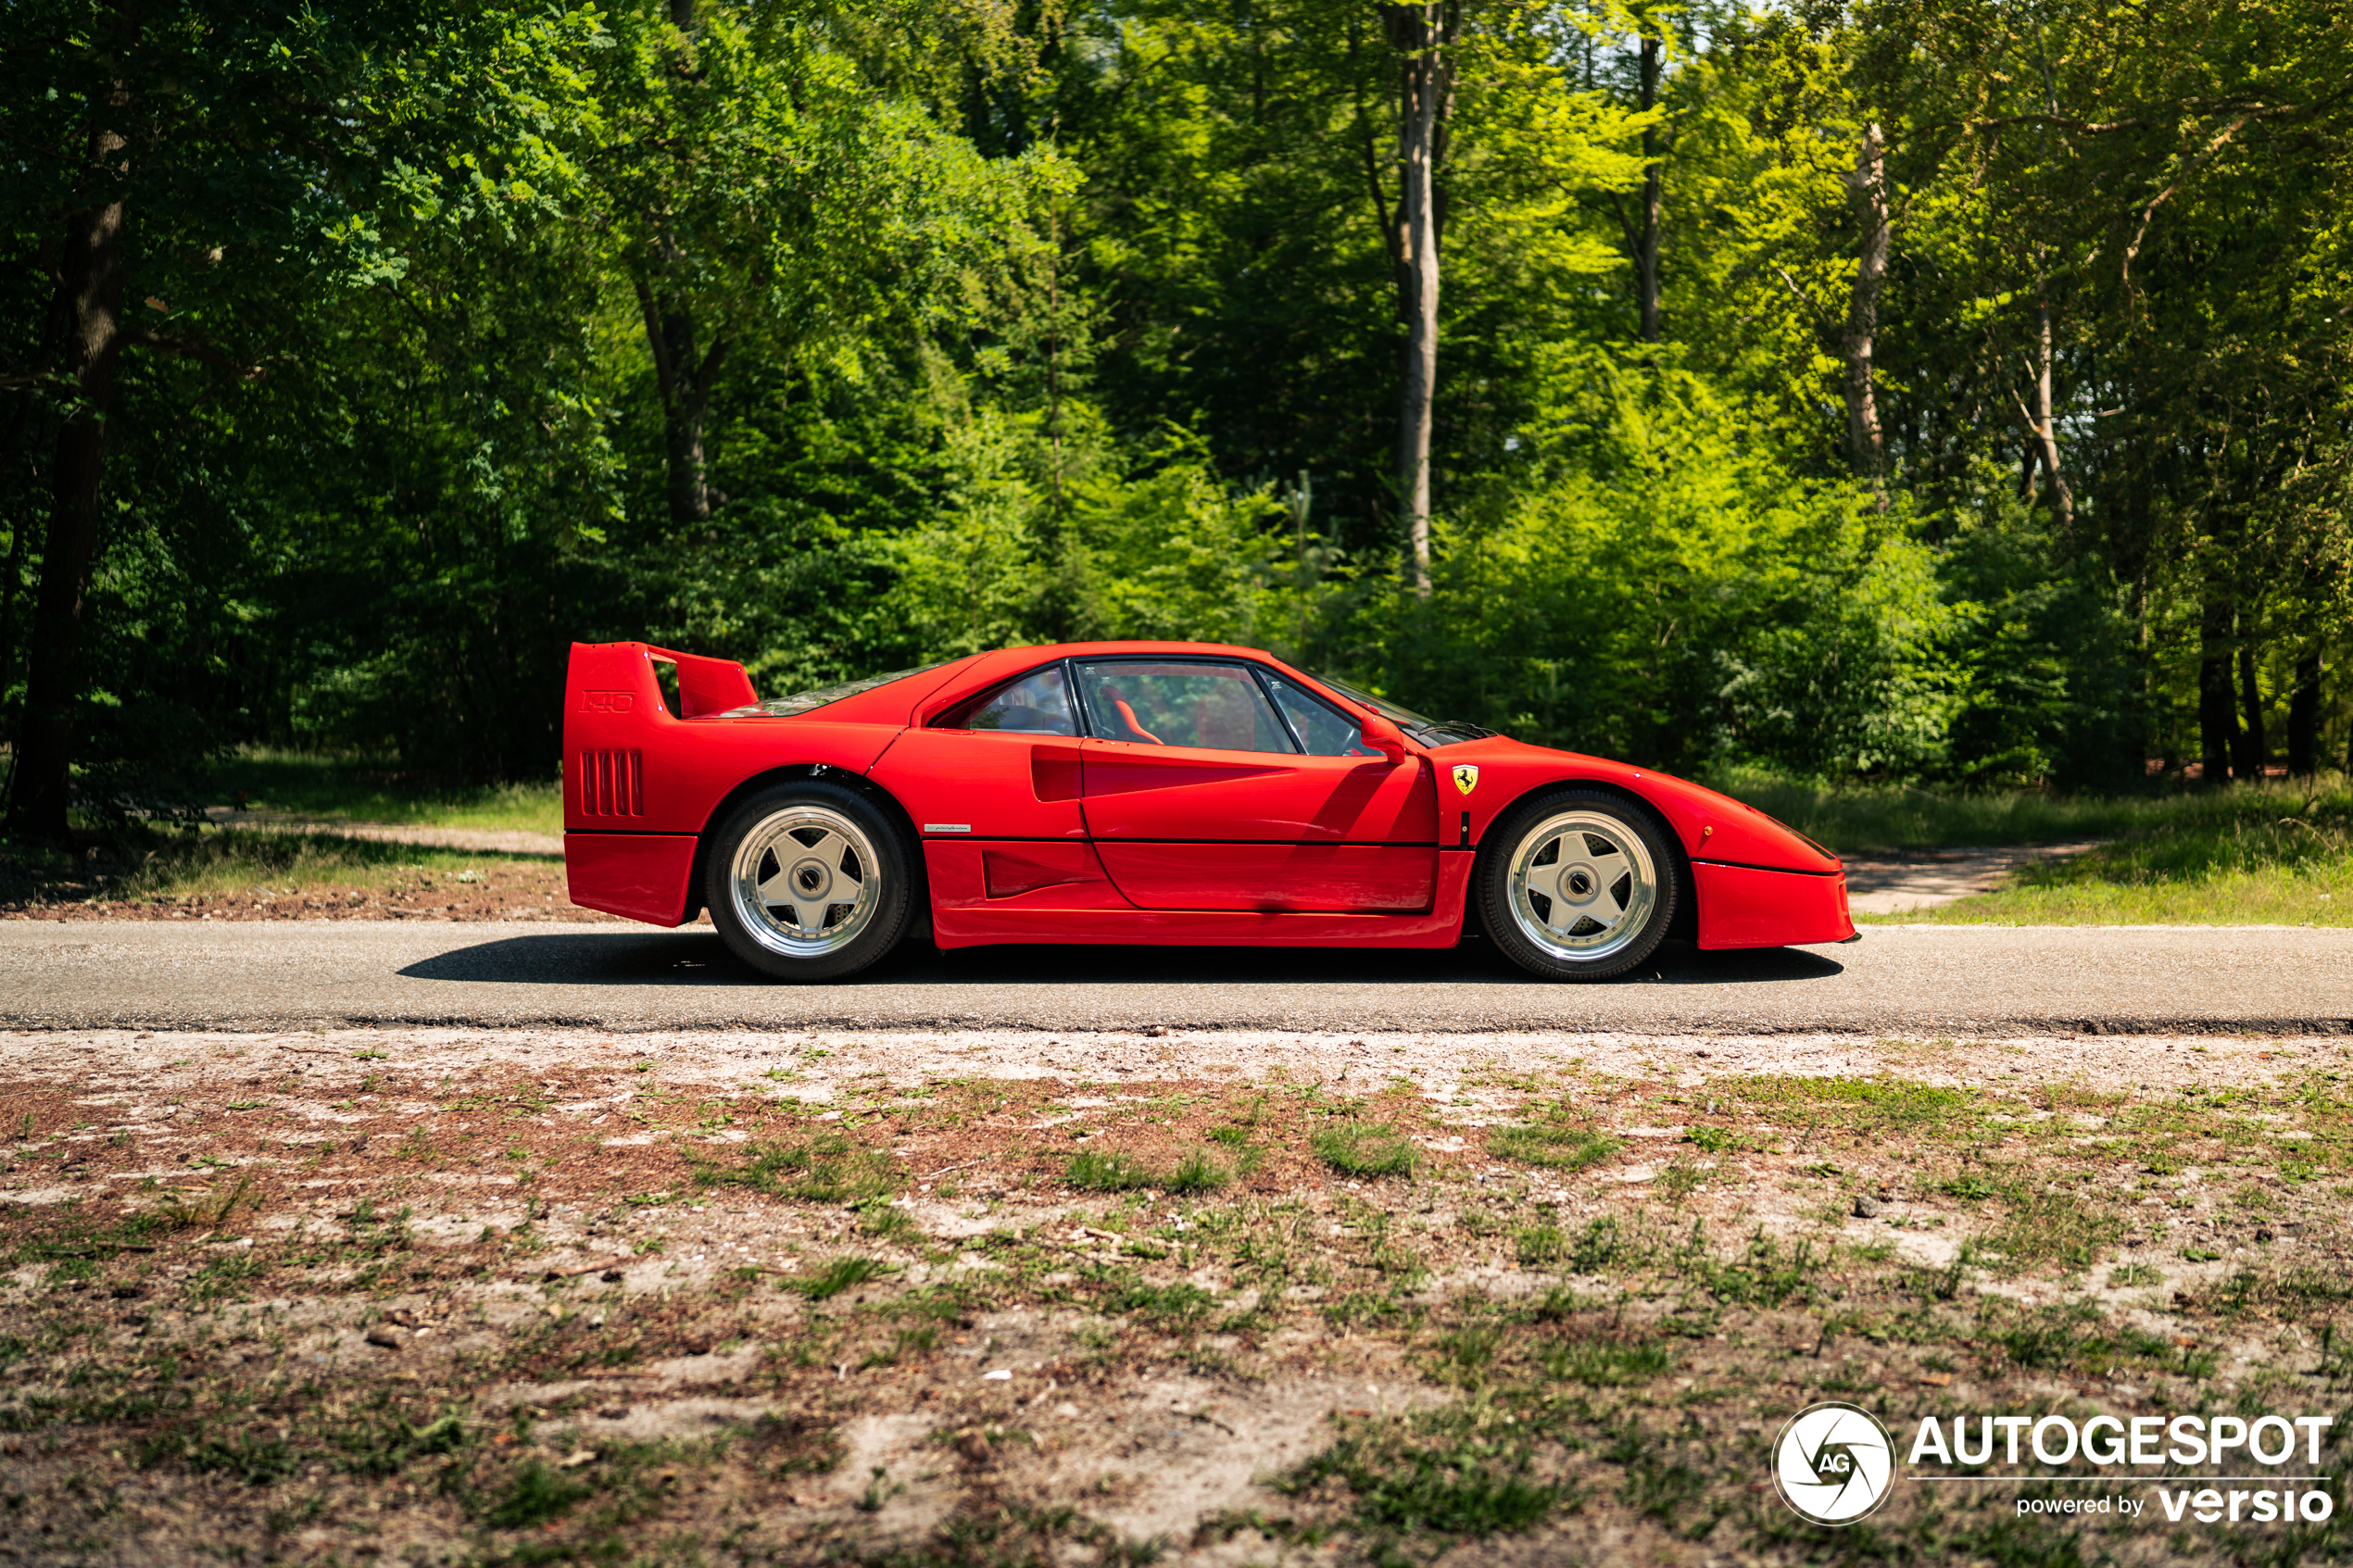 Is the F40 the most iconic ferrari of all time?